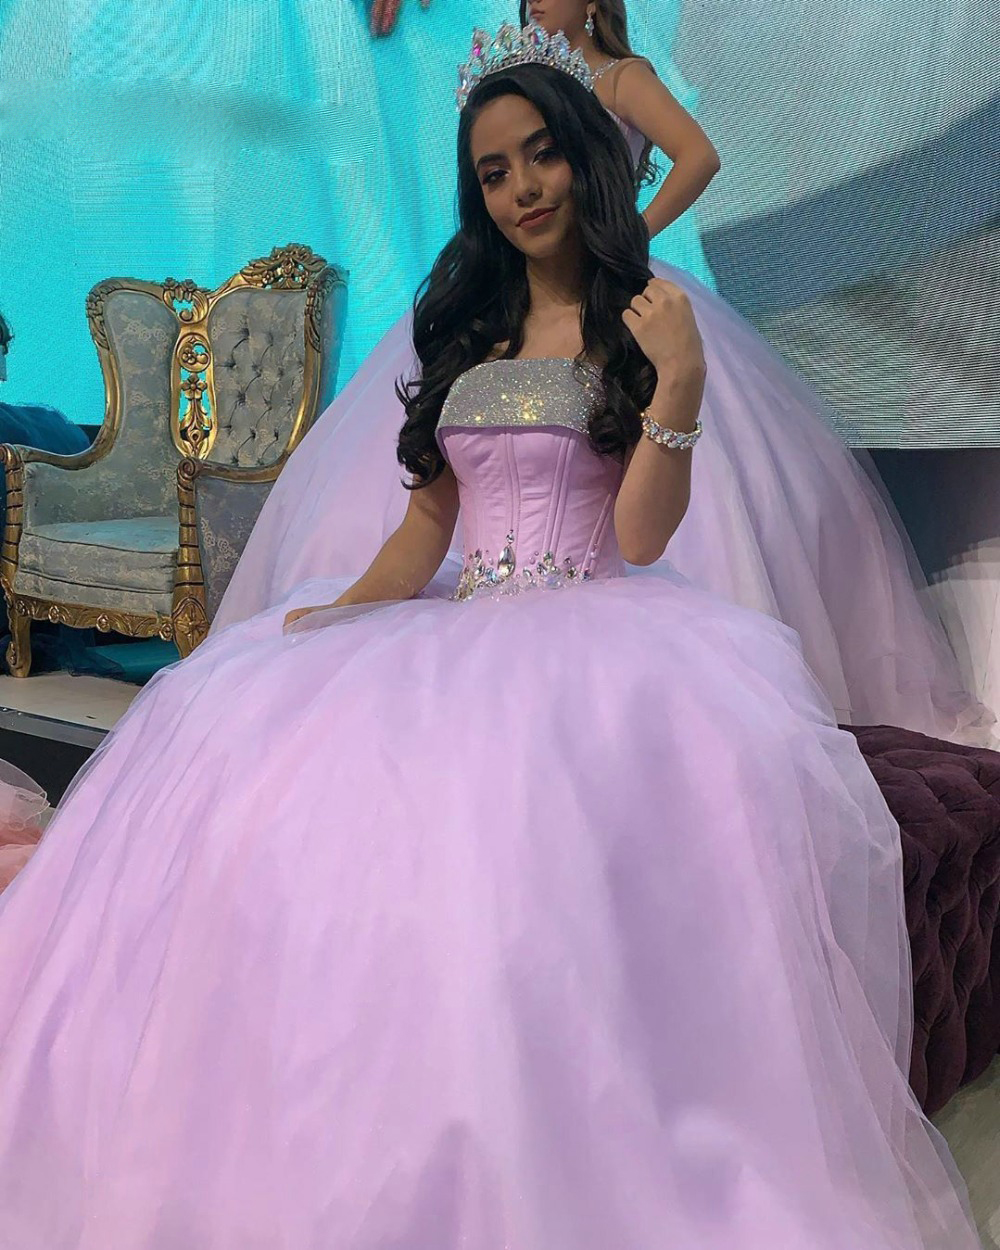 

Light Purple Ball Gown Quinceanera Dresses 2020 Sexy Violet Strapless Sweet 16 Dress Beading Sweetheart Tulle Pageant Party Gown, Burgundy